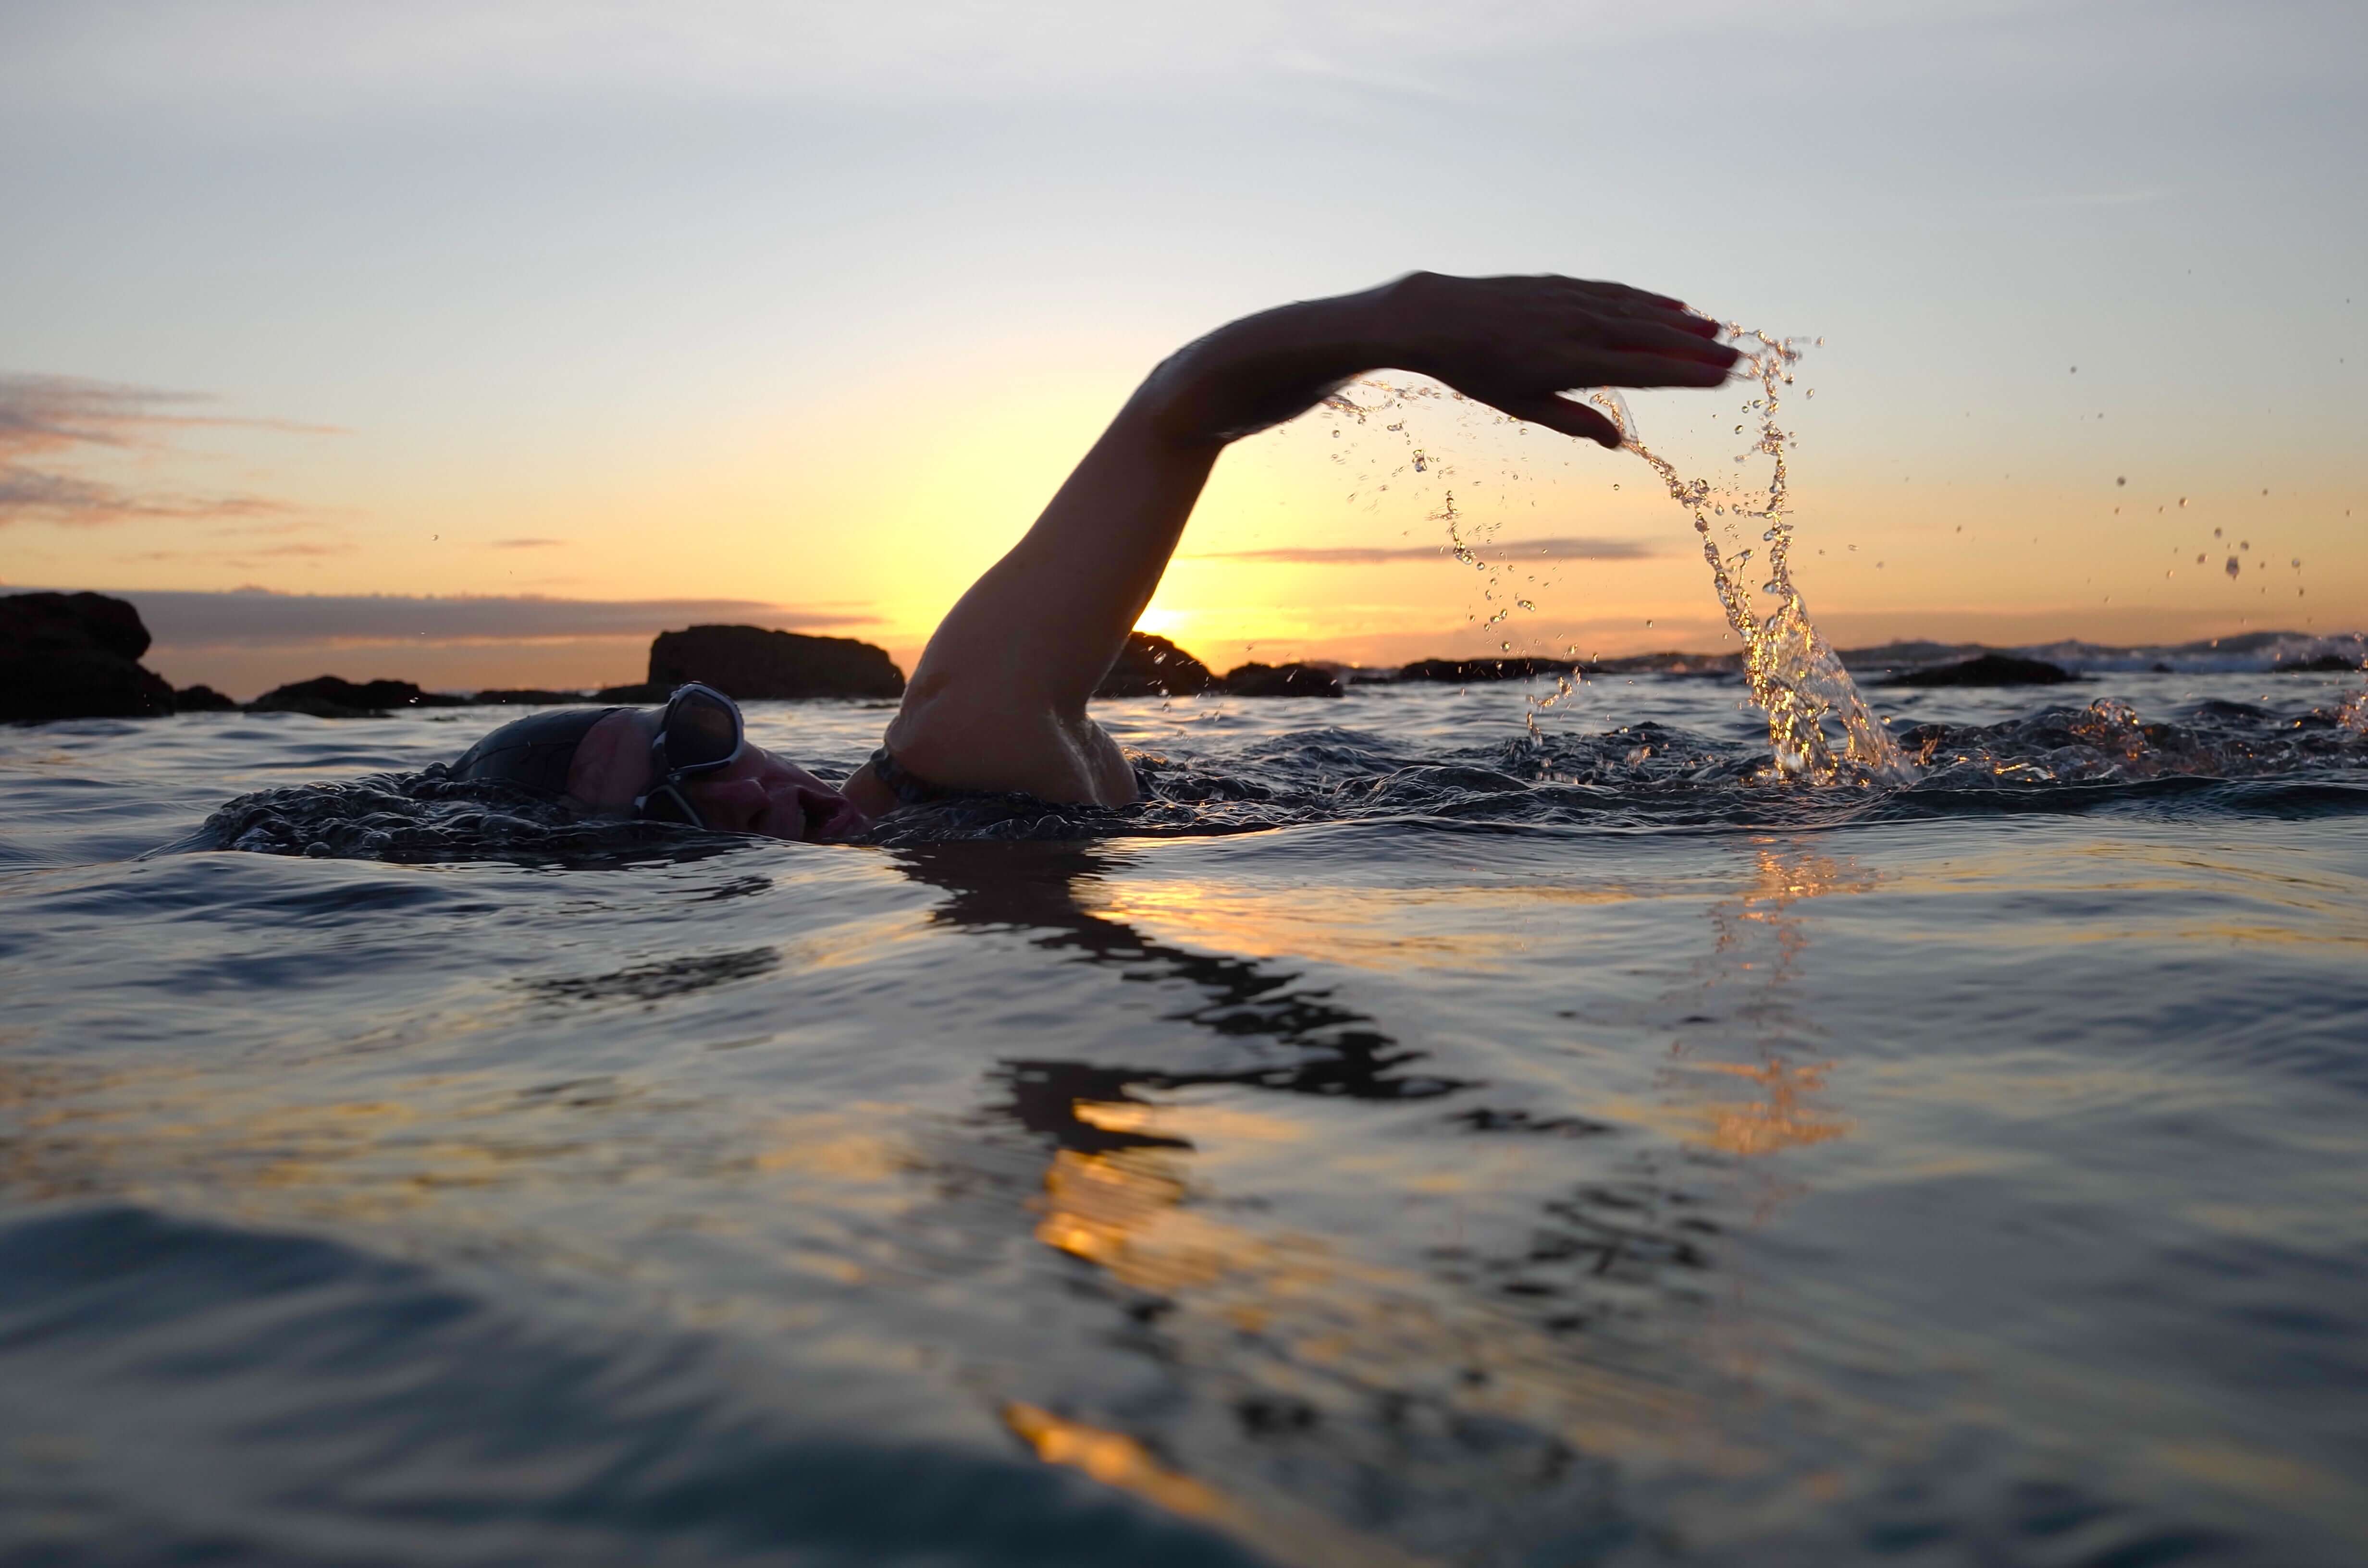 How to Get Started with Wild Swimming